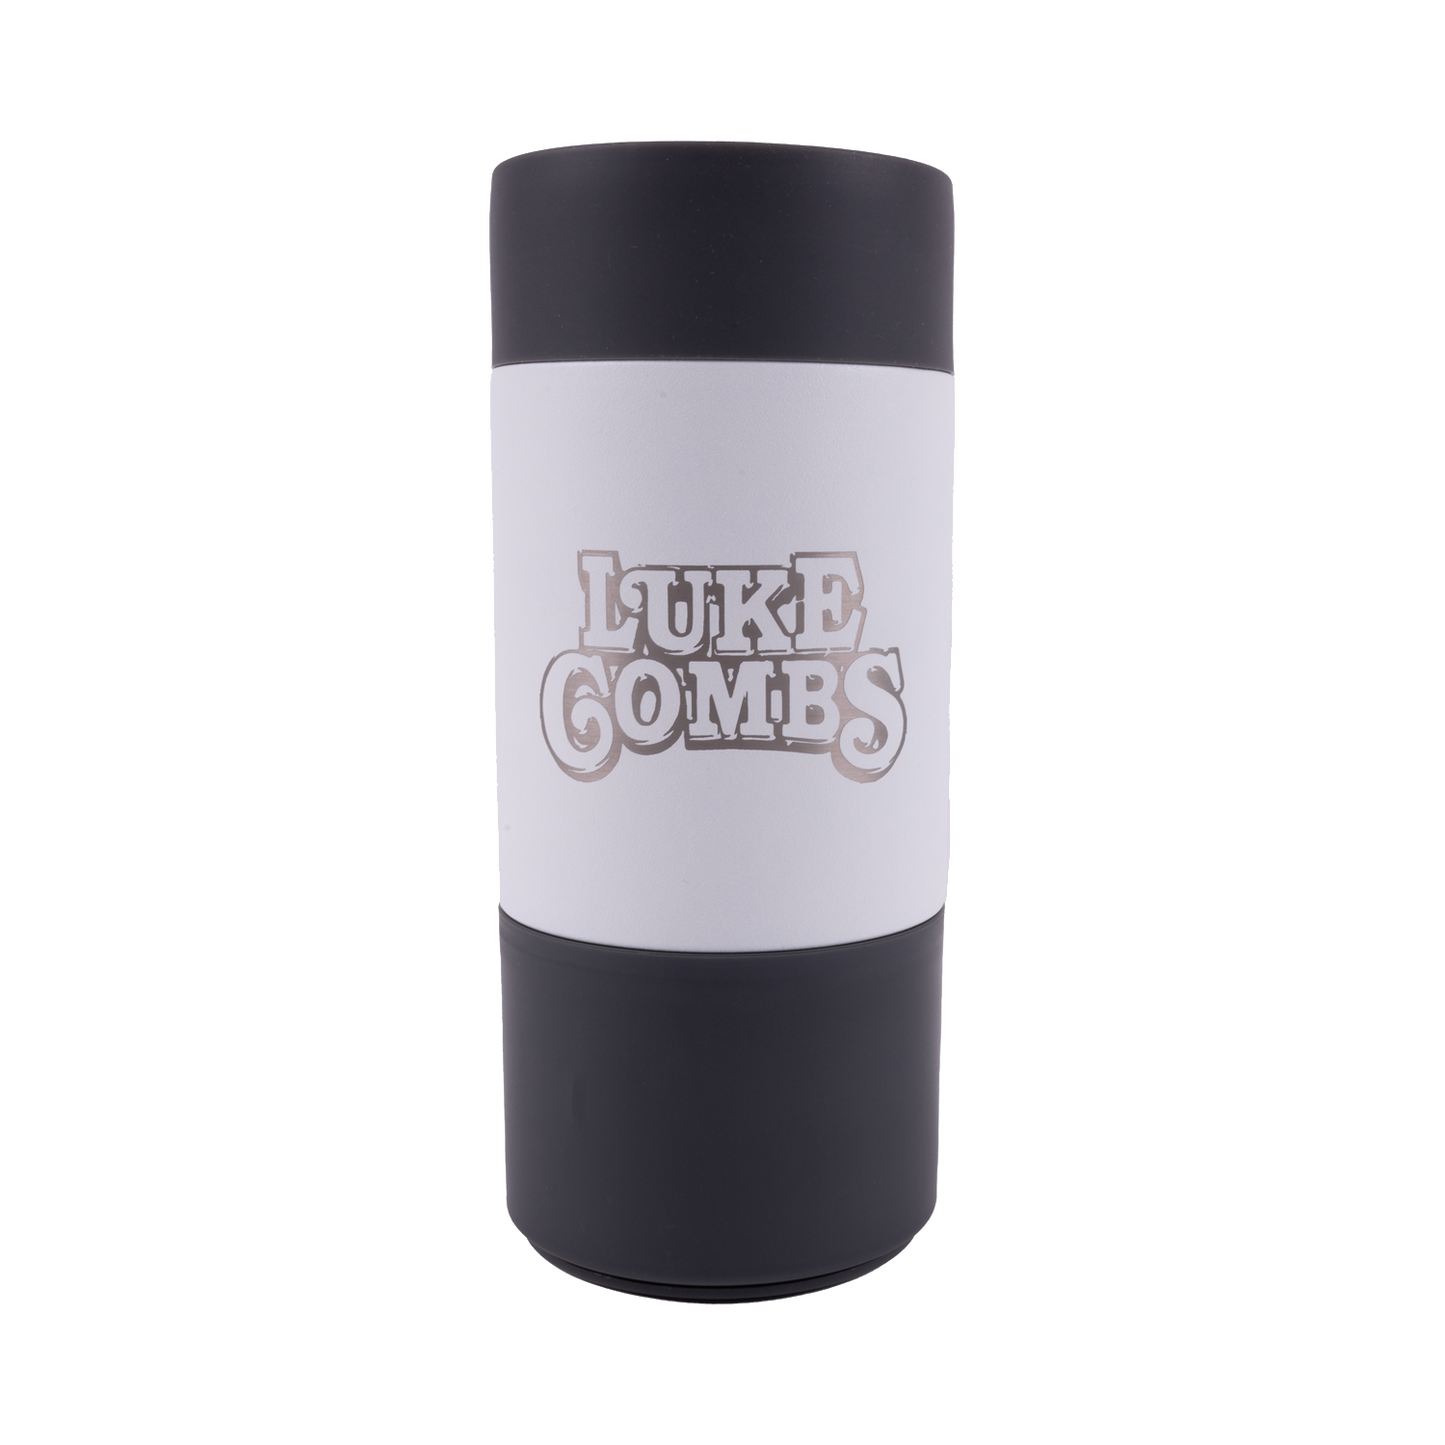 Toadfish Outfitters x Luke Combs Anchor Cup Holder